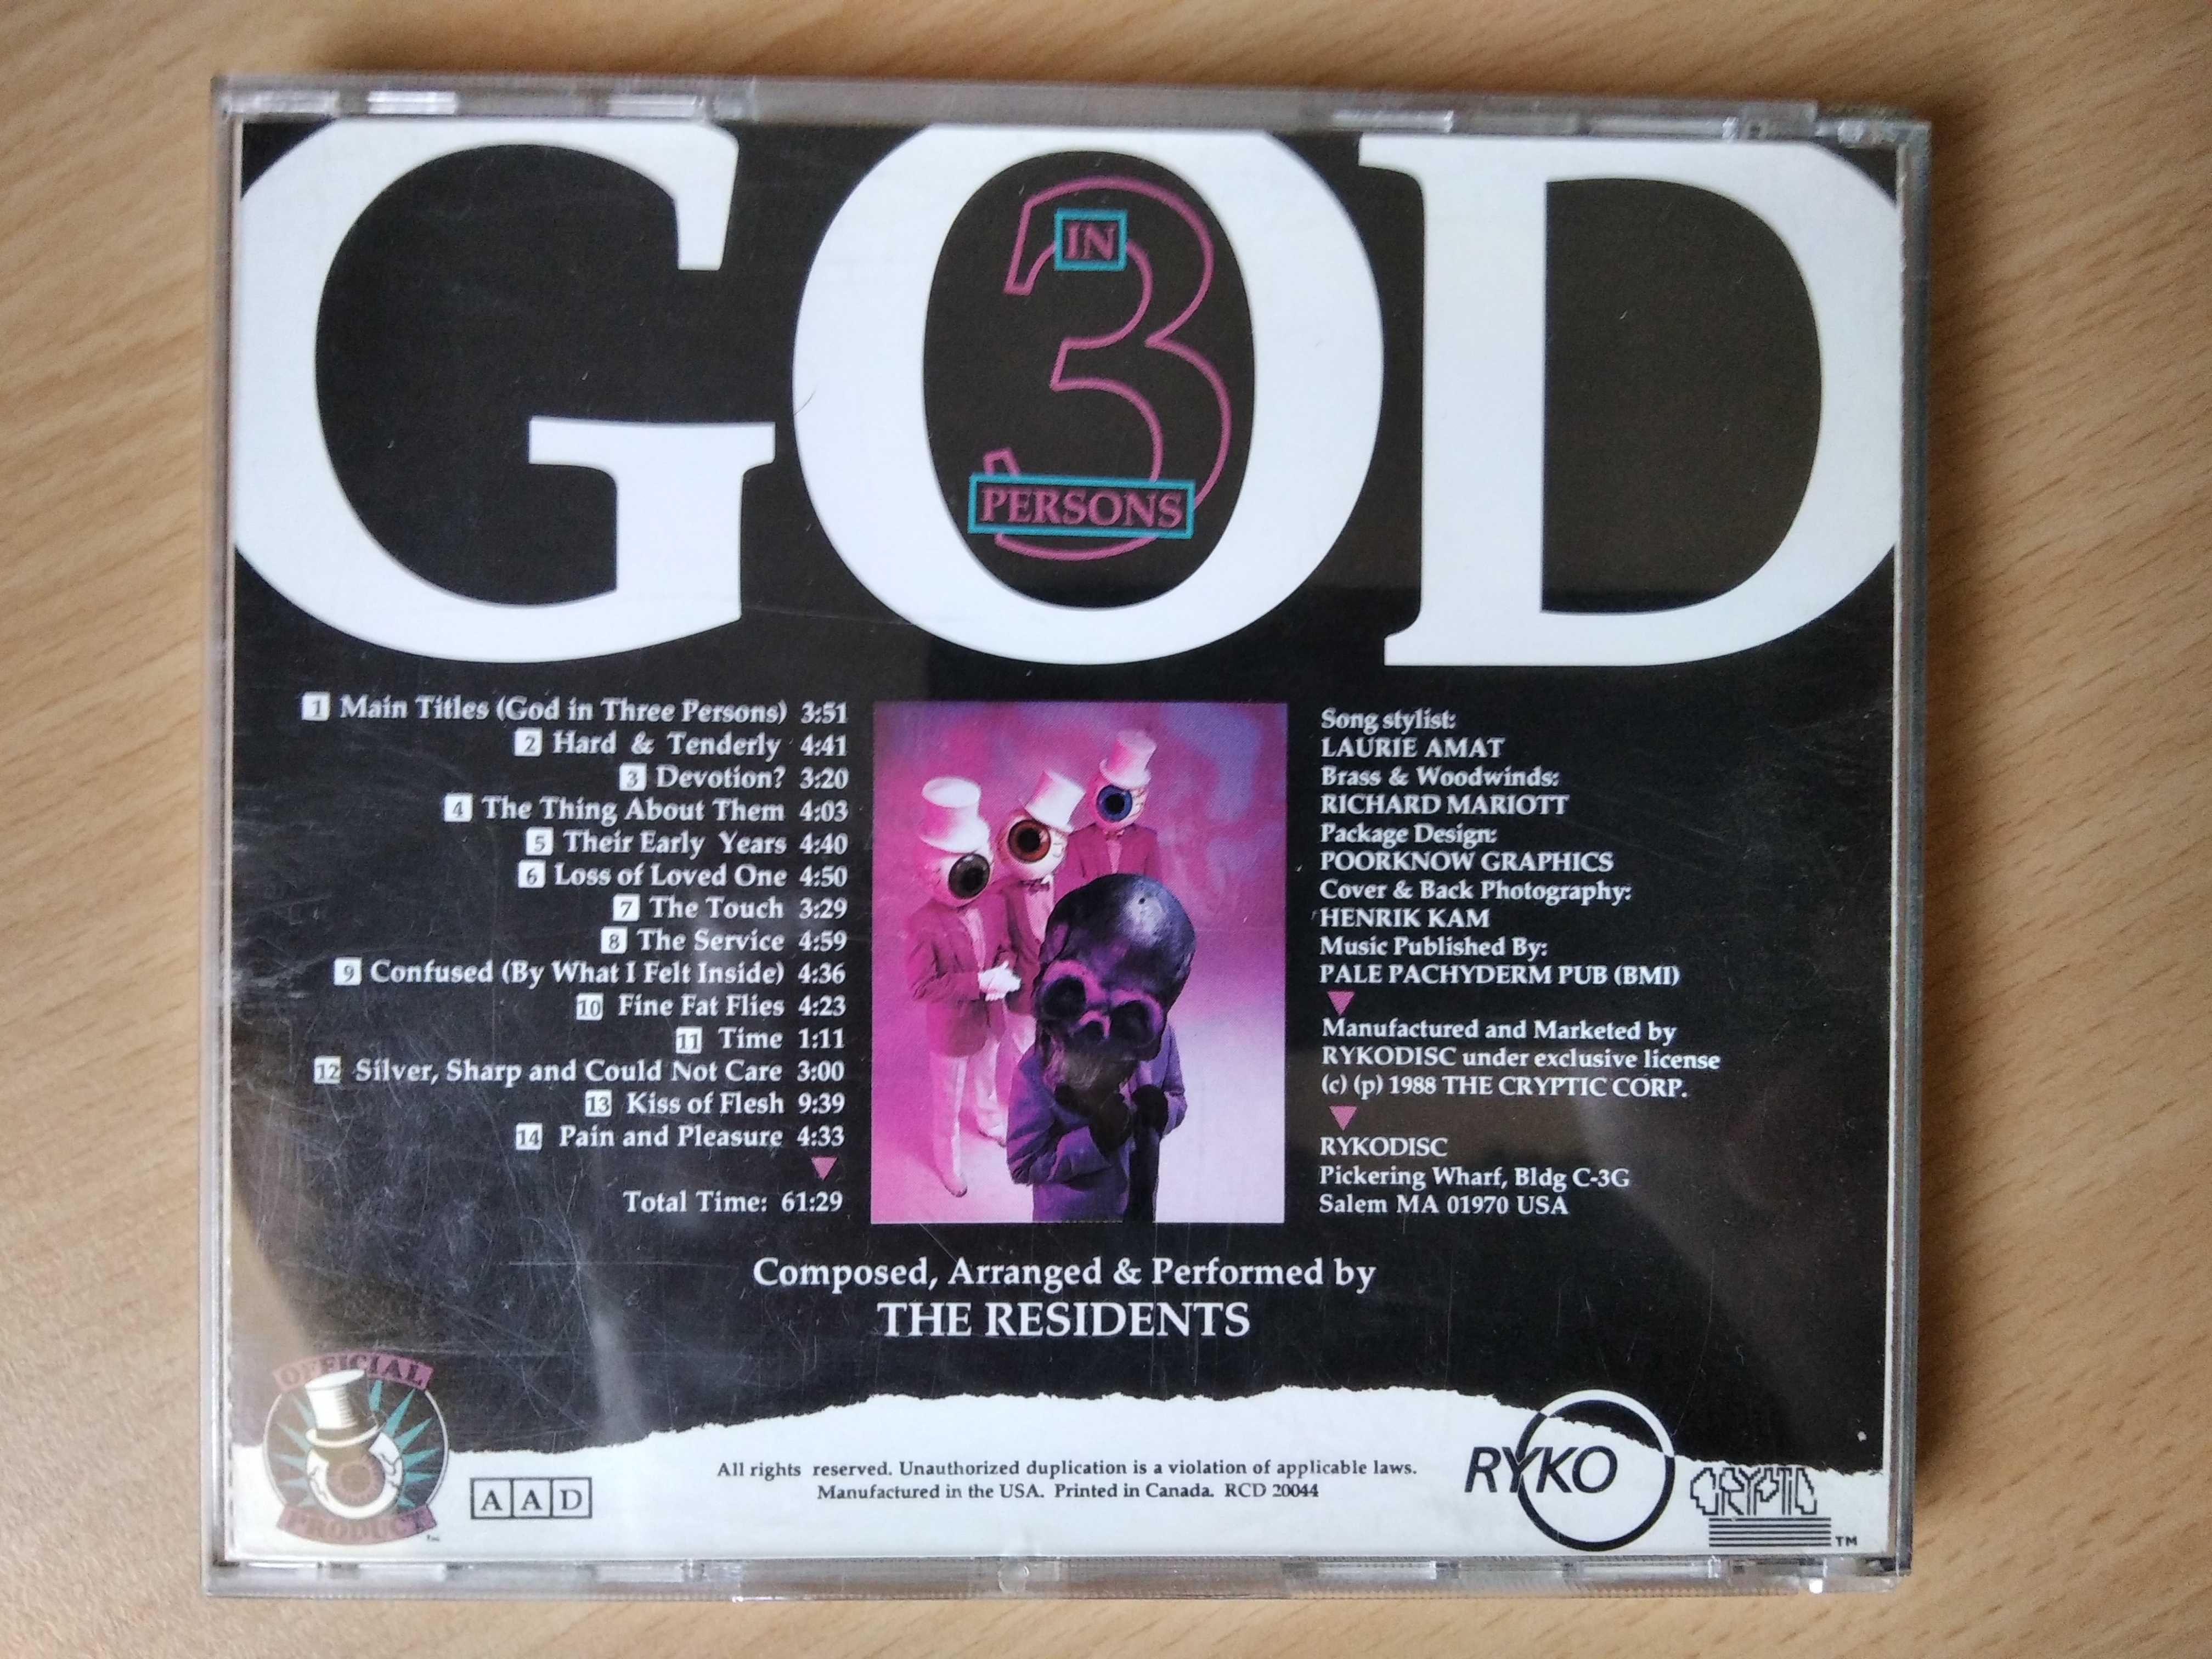 The Residents - God In Three Persons - 1988 CD